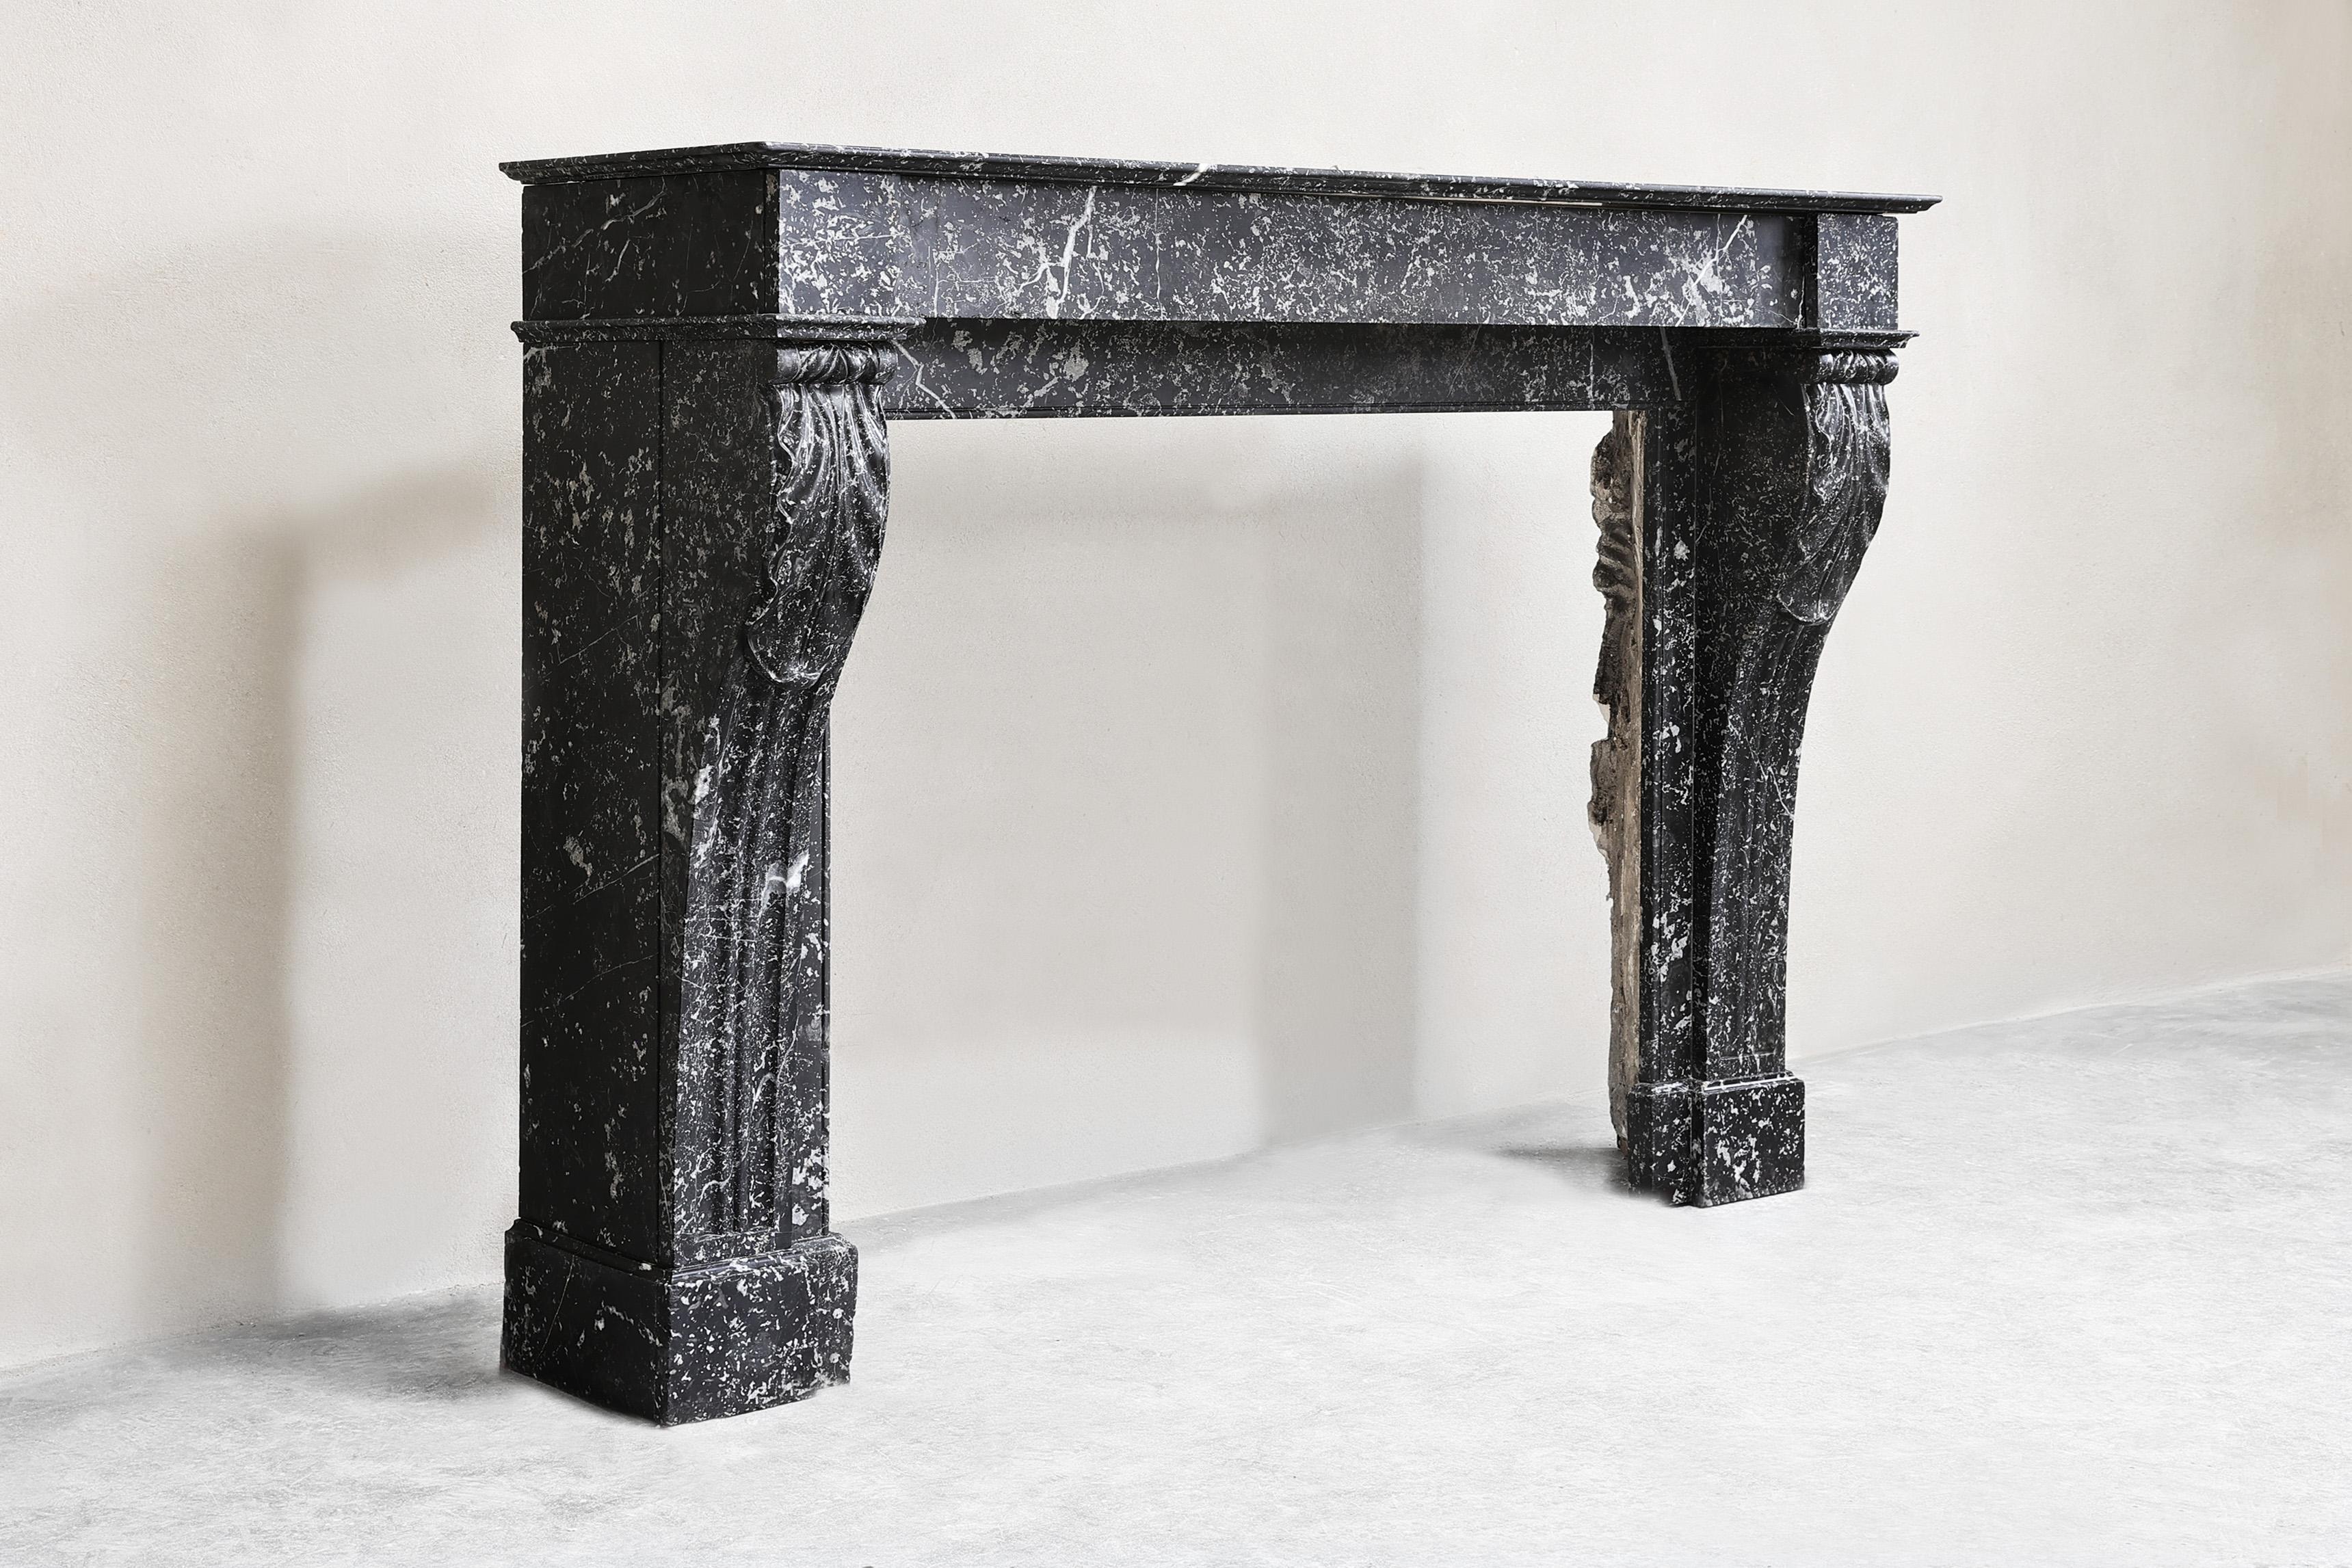 Beautiful antique mantelpiece made of black marble with white veins in the style of Louis XVI from the 19th century! This beautiful, sleek mantle has slightly curved legs and a warm appearance! A beautiful fireplace with an accessible size.